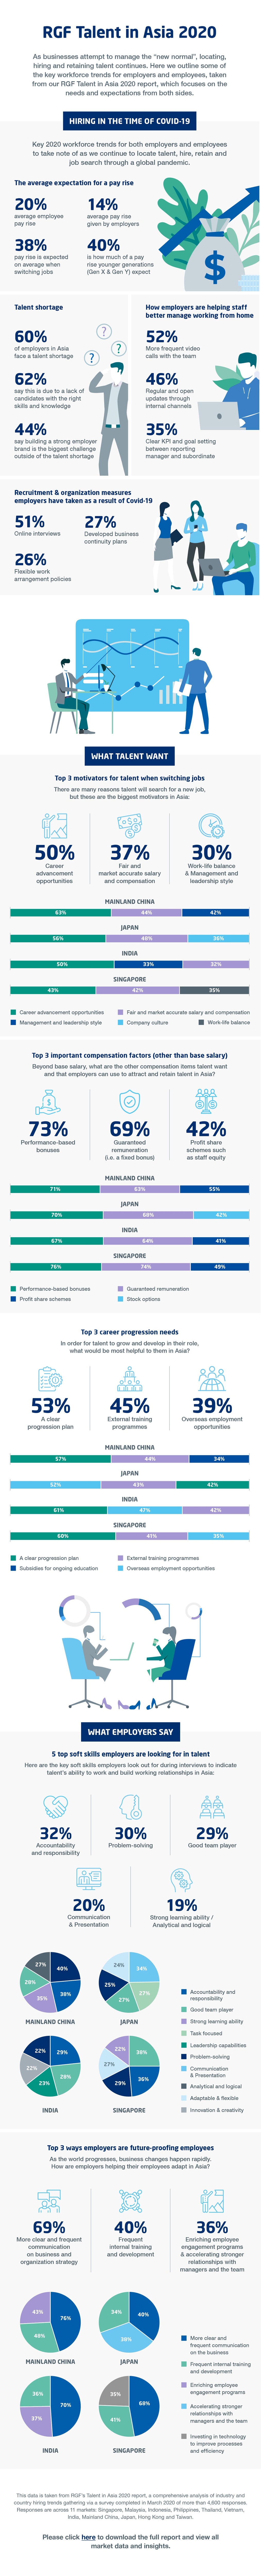 talent in asia 2020 infographic